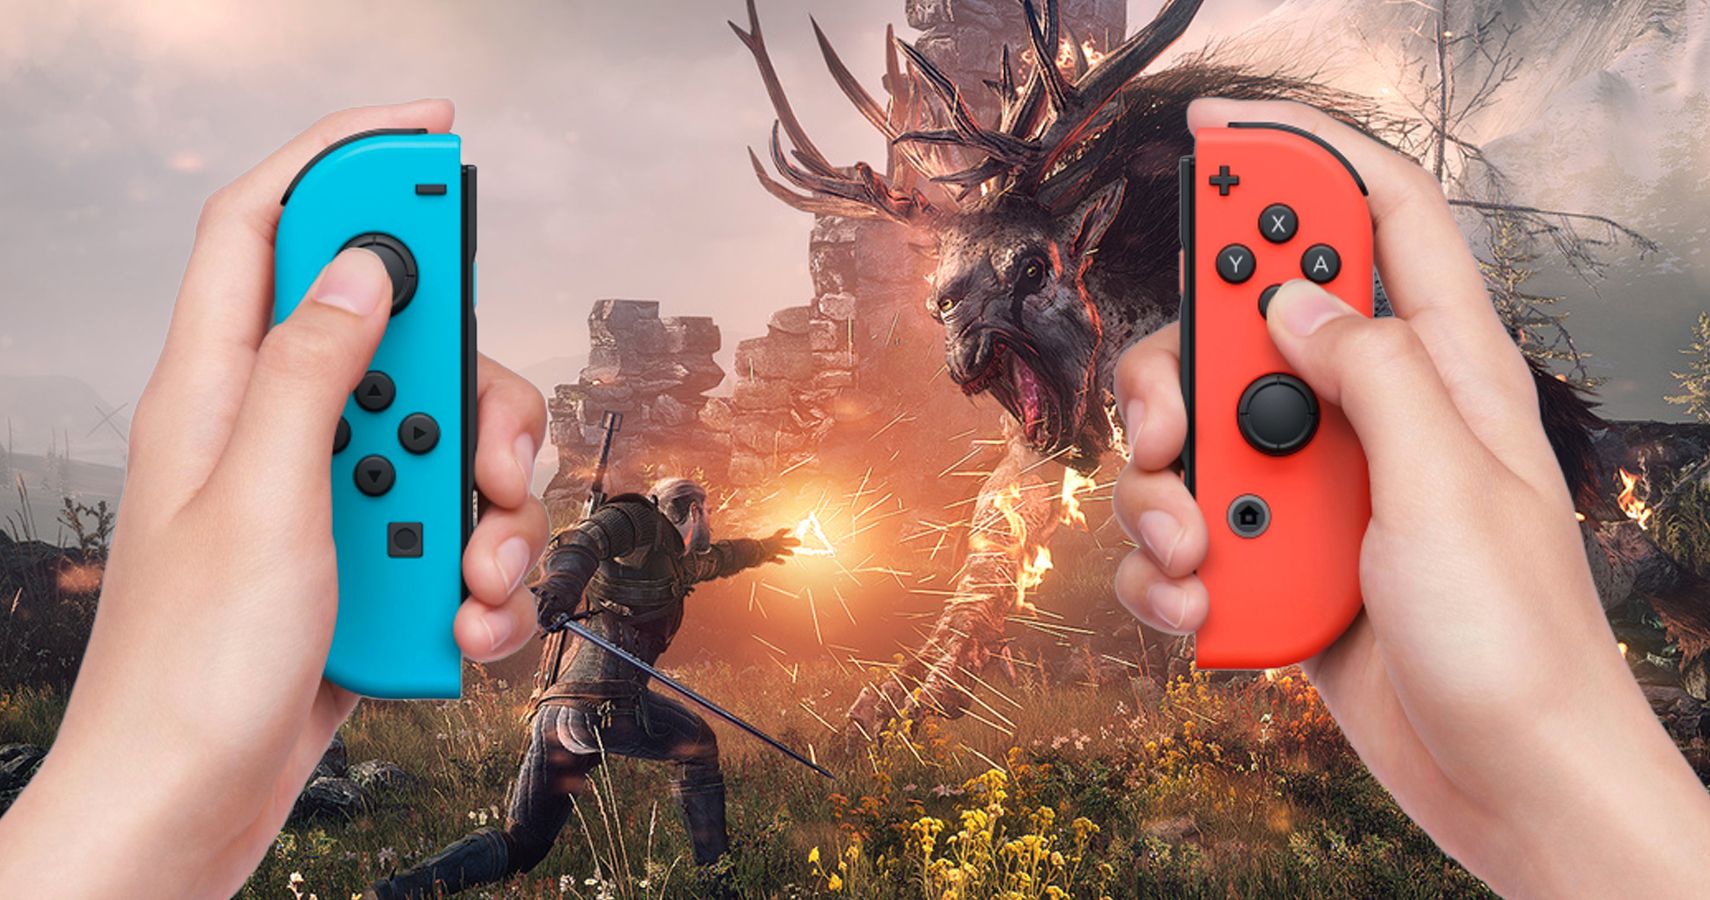 The Witcher 3 and Overwatch Arrive on Switch - Cal Times